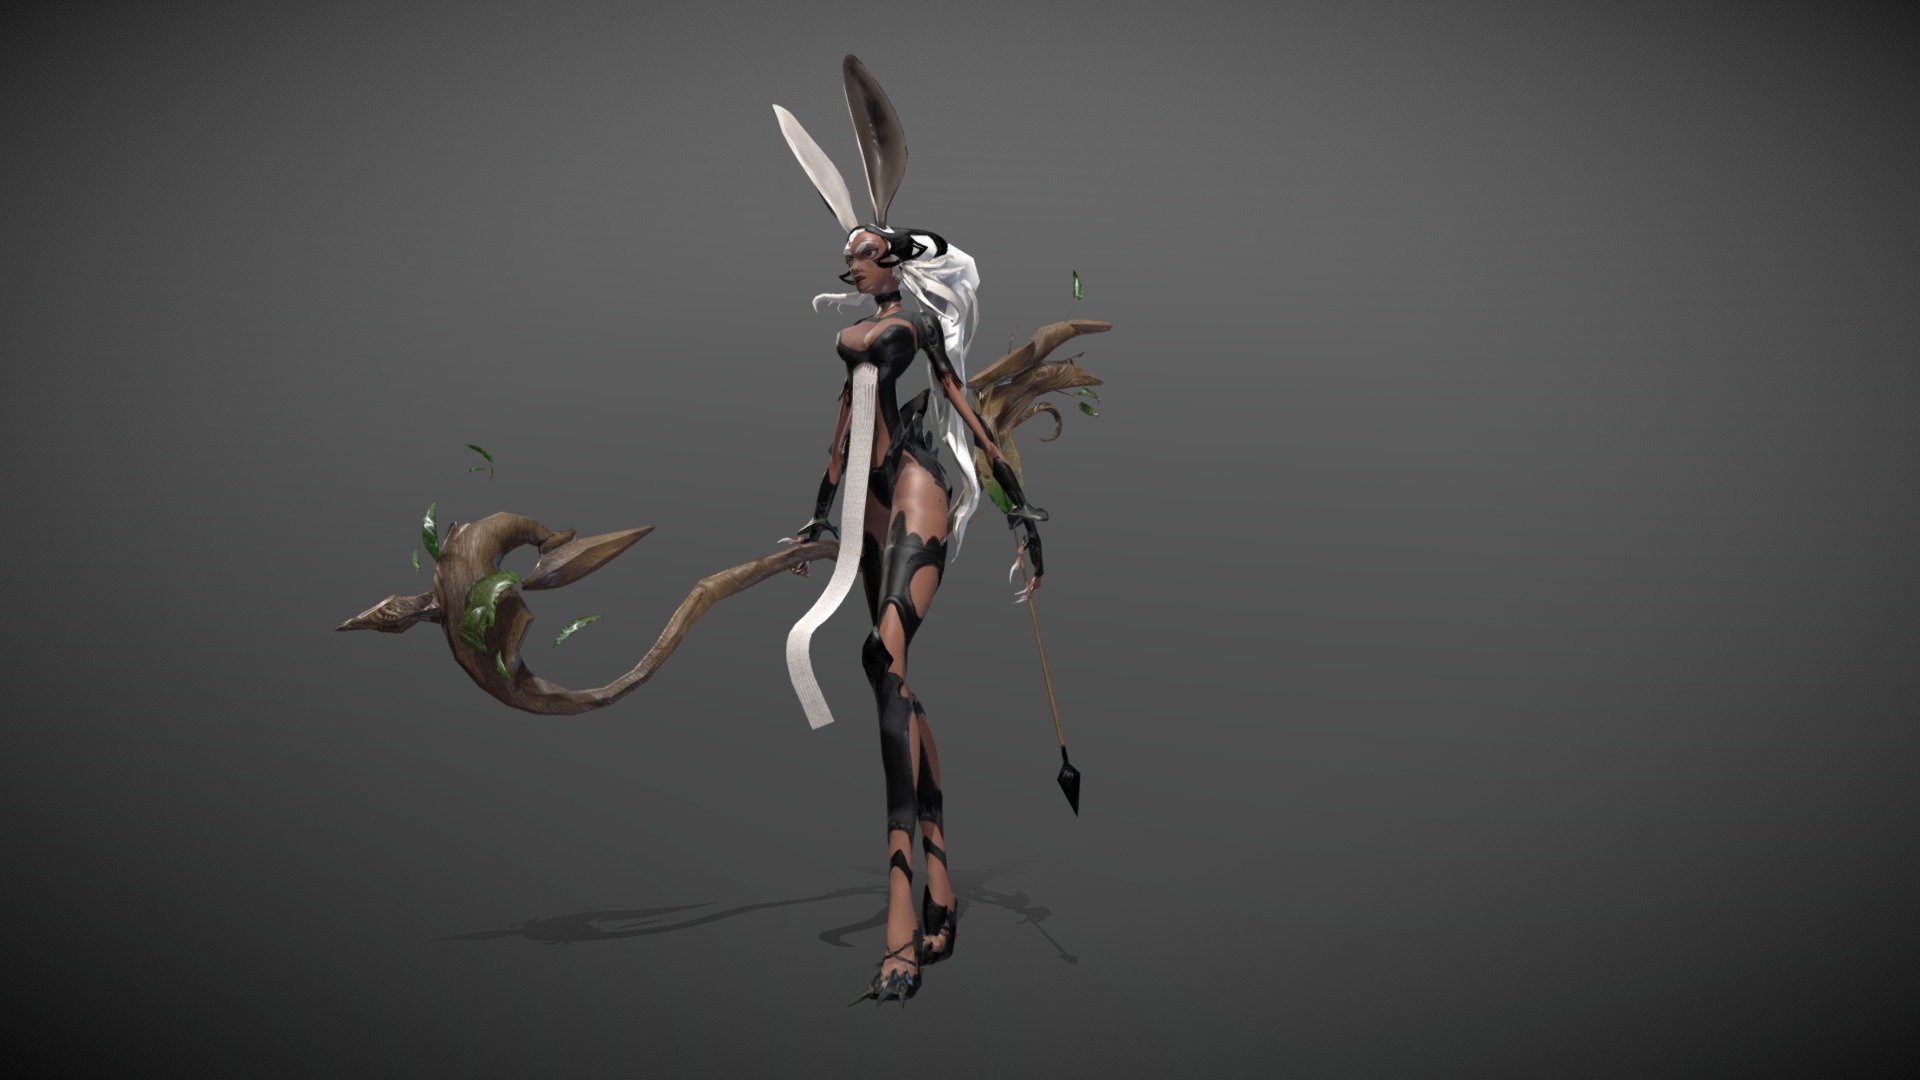 hello everyone.

This is my model i made for the final in stylized Creation at DAE in kortijk.

The concept for this model is made by Dashiana and is a fan art od fran from the final fantasy games. Art Link: https://www.artstation.com/artwork/o2Zv2w

i really enjoyed working on this and learned a lot over the past few months. This was a really hard time for me due to lacking experience in zbrush ut over the past 4 months i learned a lot and improved quite a bit.

Anyway i hope you like it 3d model